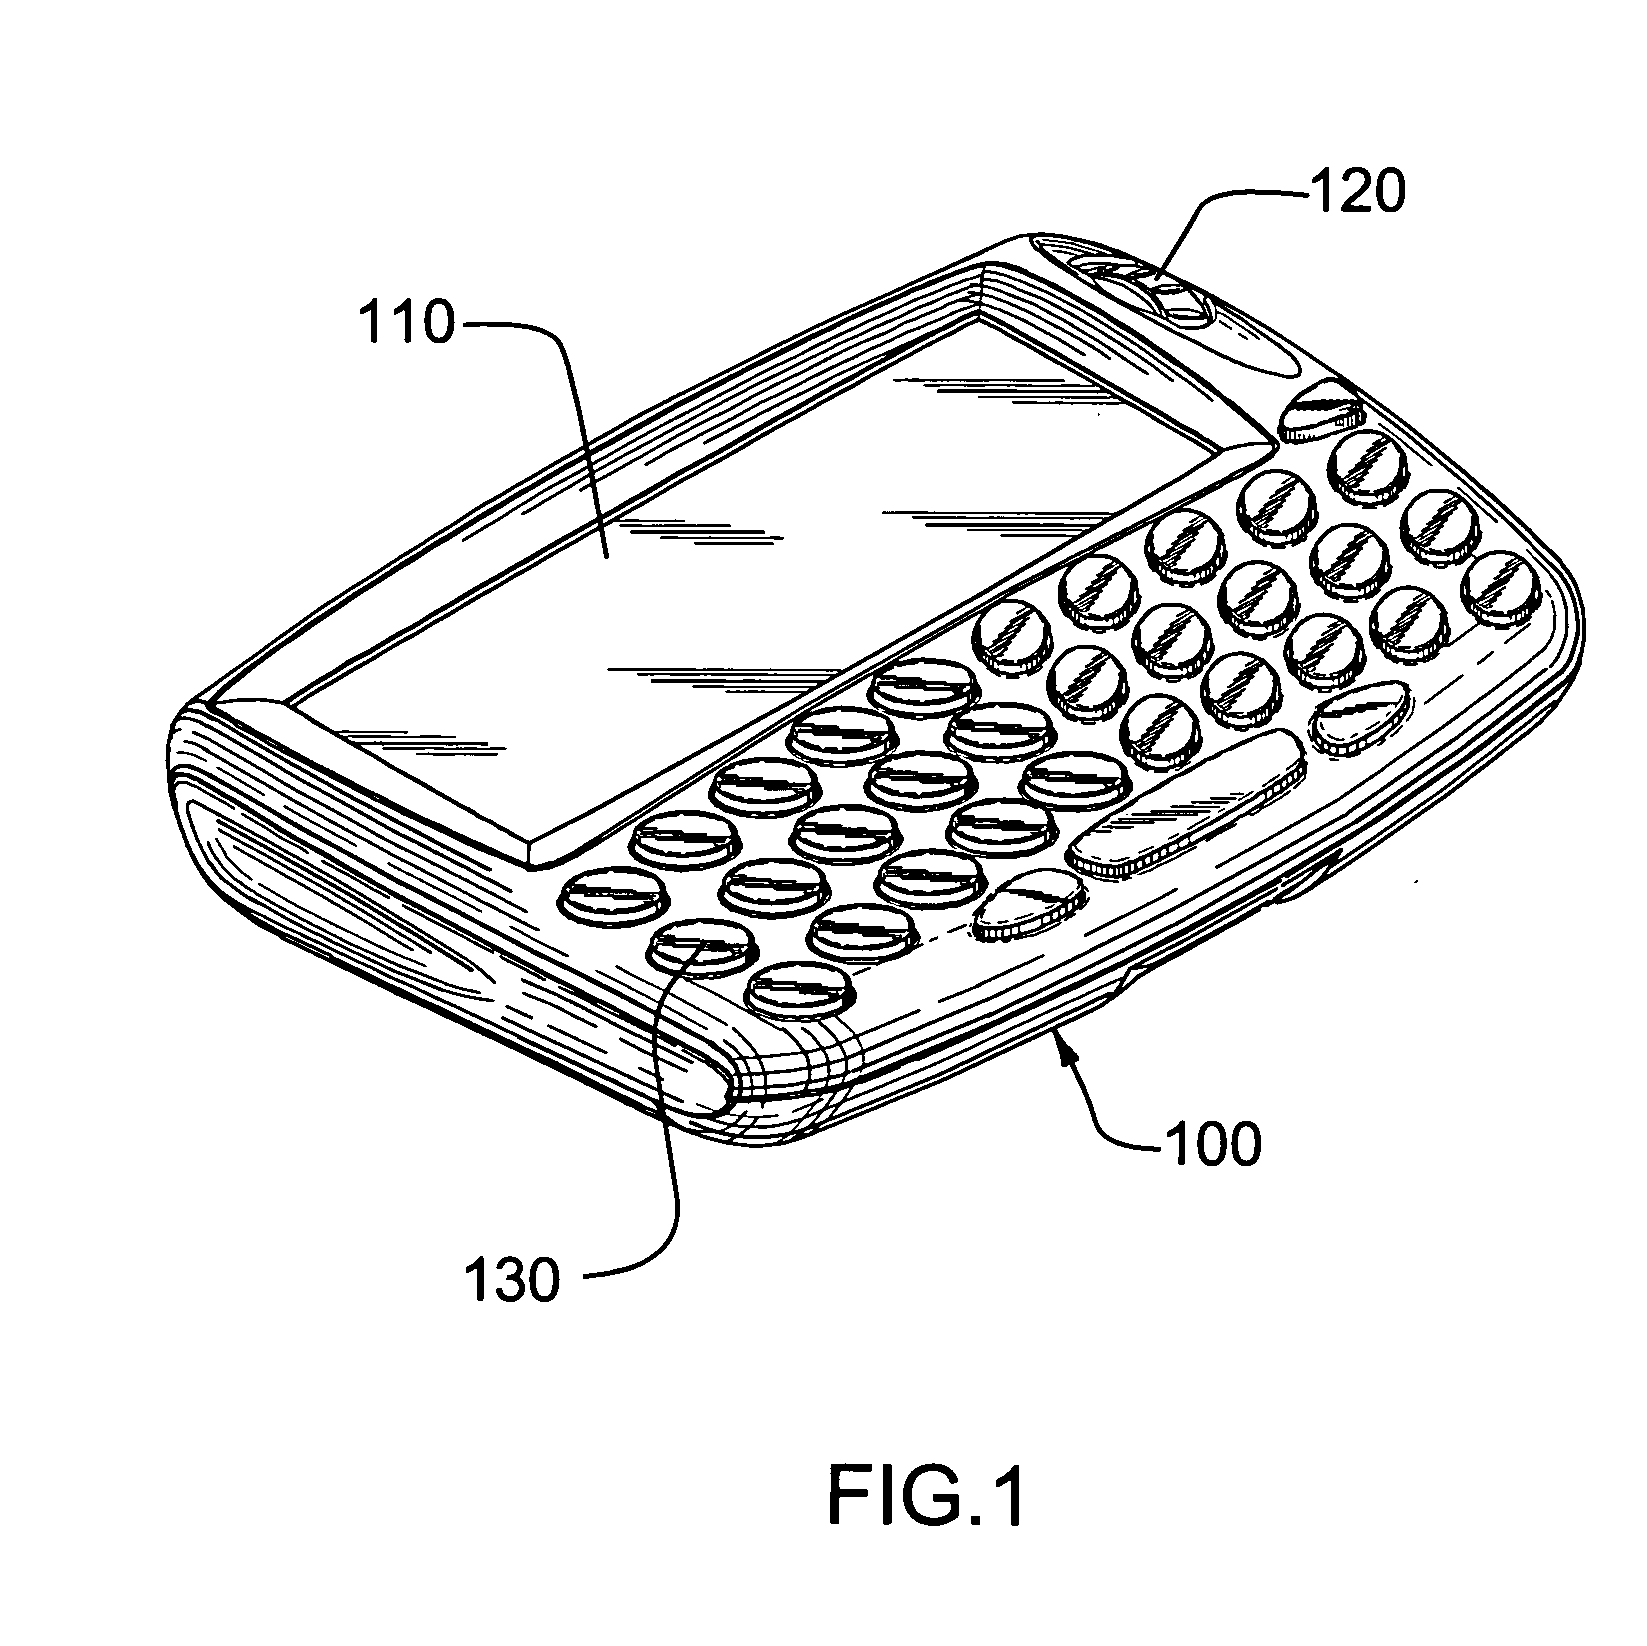 System and method for providing dynamic tactile feedback on hand-held electronic devices